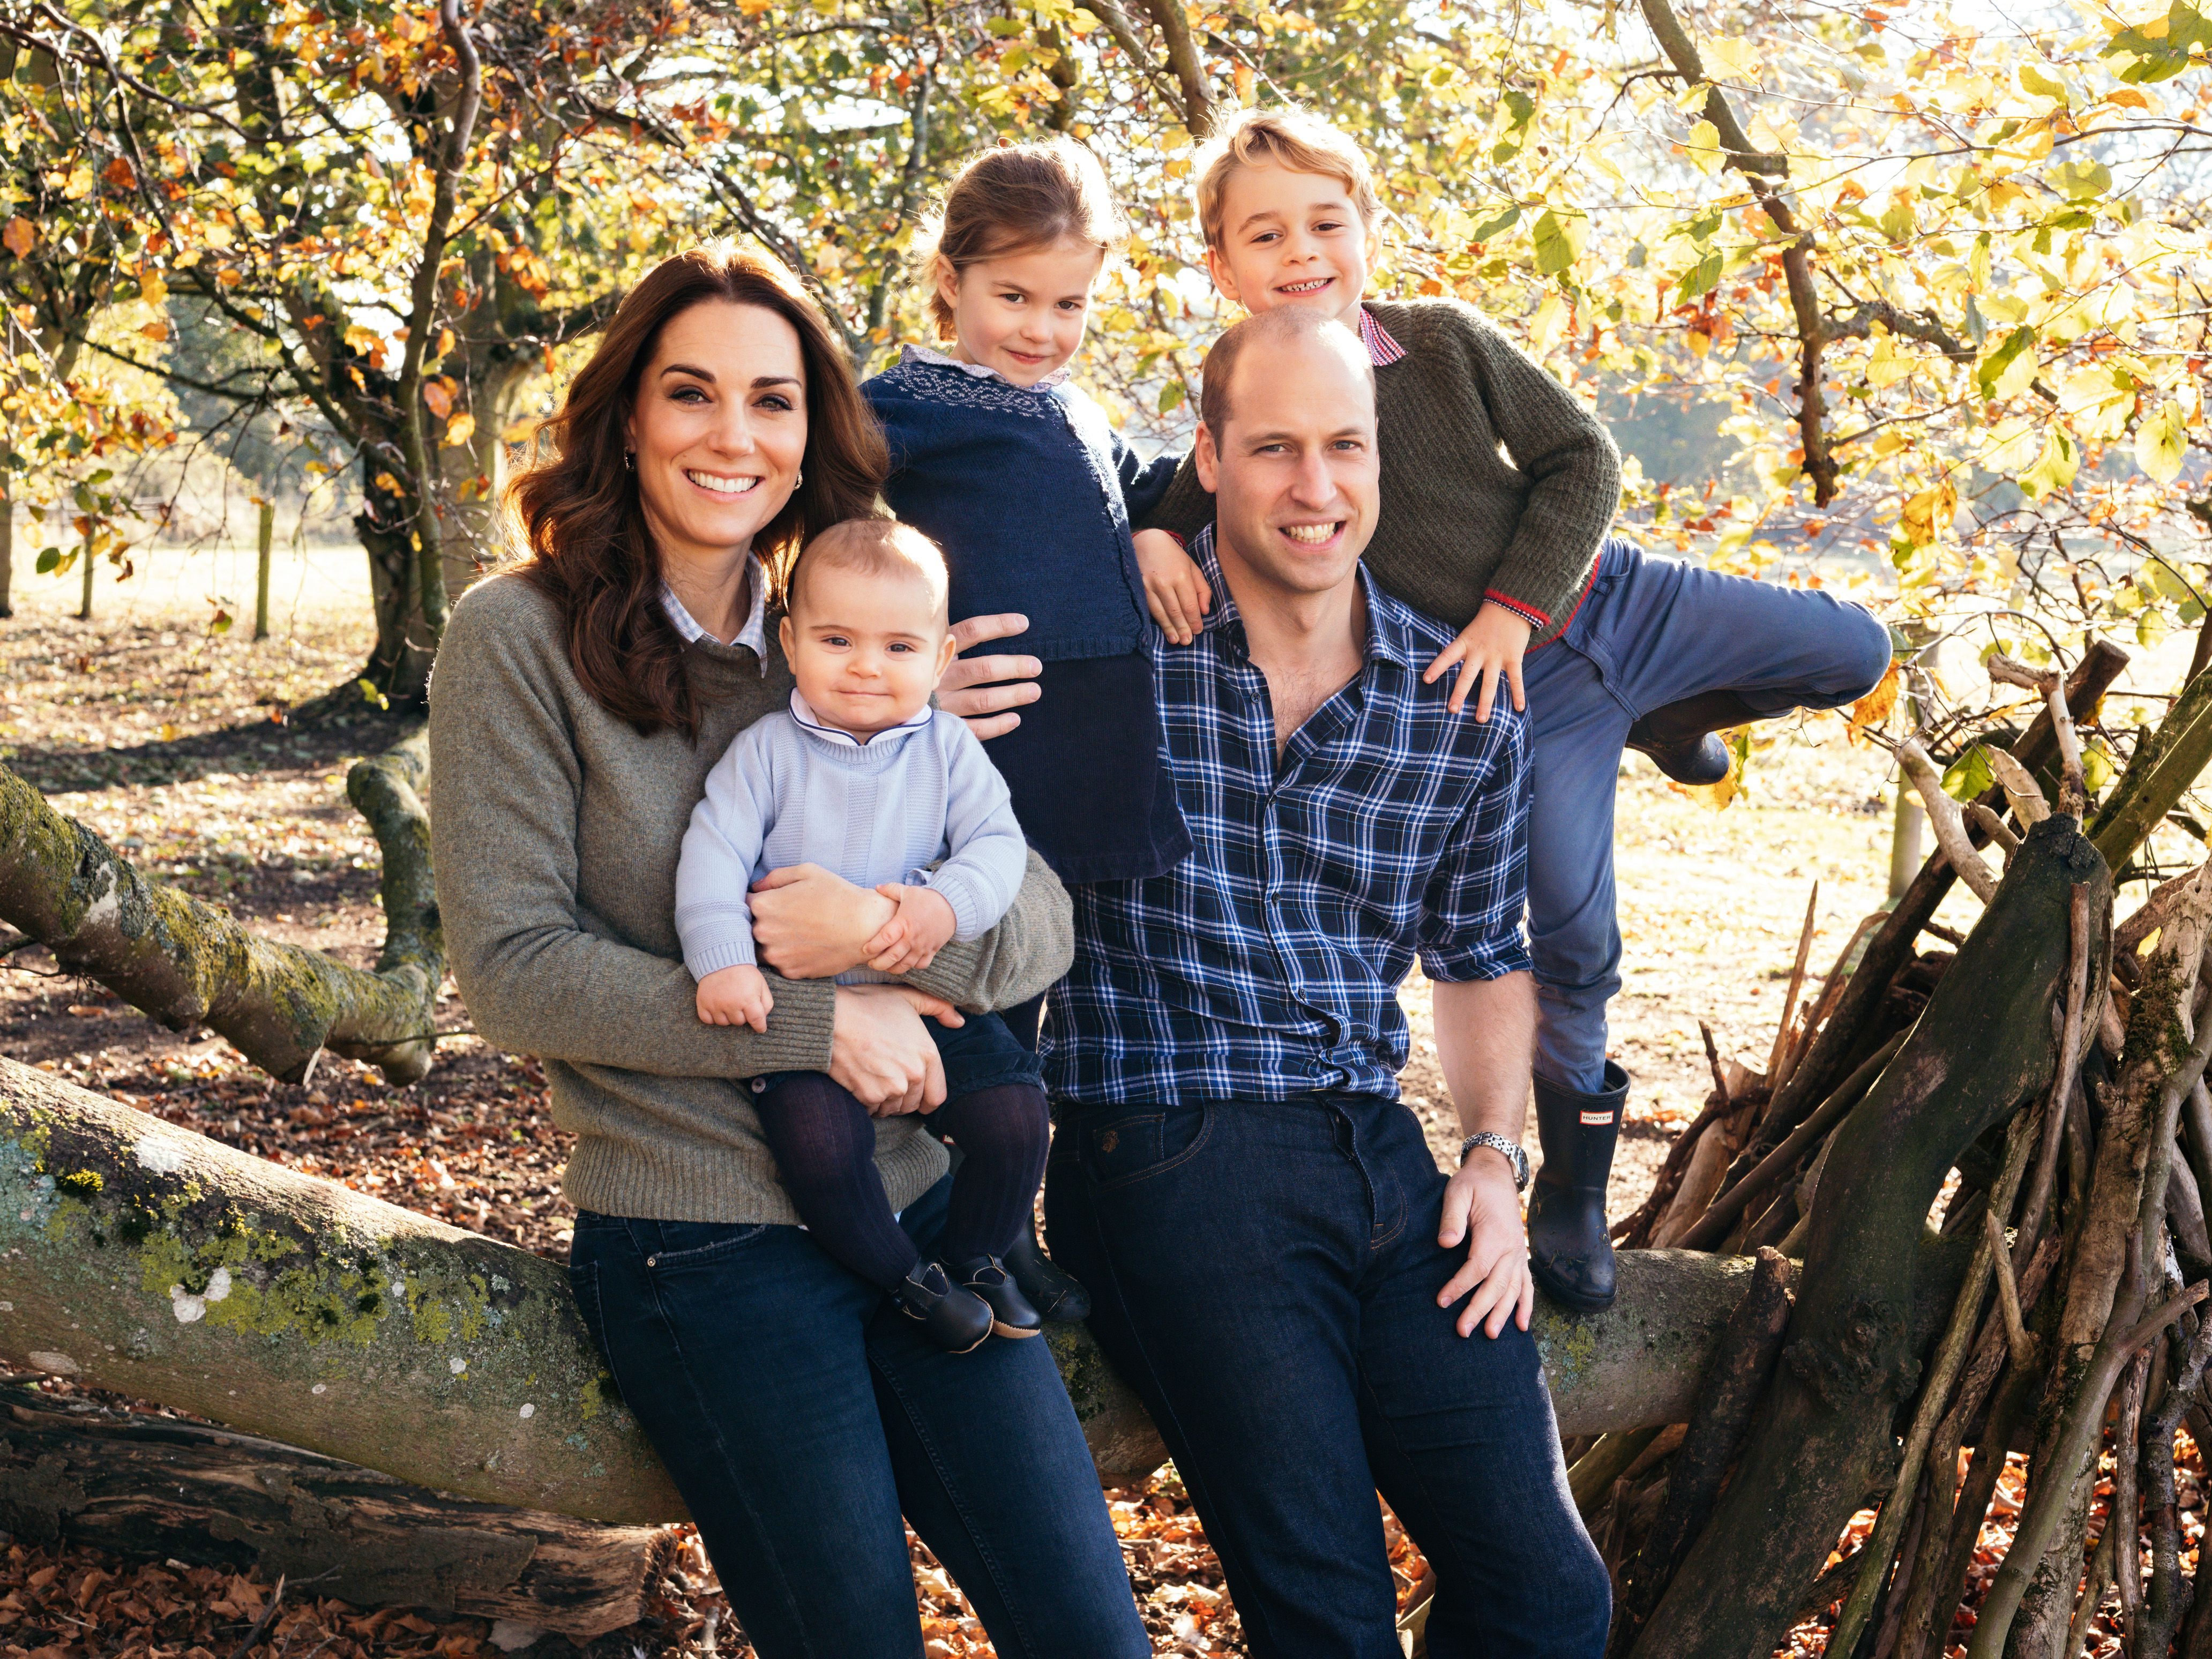 This photograph must not be used after 31st December 2019. News Editorial Use Only. No Commercial Use. Free for use. The photograph must include all of the individuals when published. Mandatory Credit: Photo by Matt Porteous/Shutterstock (10033971a) Prince William and Catherine Duchess of Cambridge with their three children, Prince Louis, Princess Charlotte and Prince George Prince William and Catherine Duchess of Cambridge family Christmas card, Anmer Hall, Norfolk, UK - 14 Dec 2018